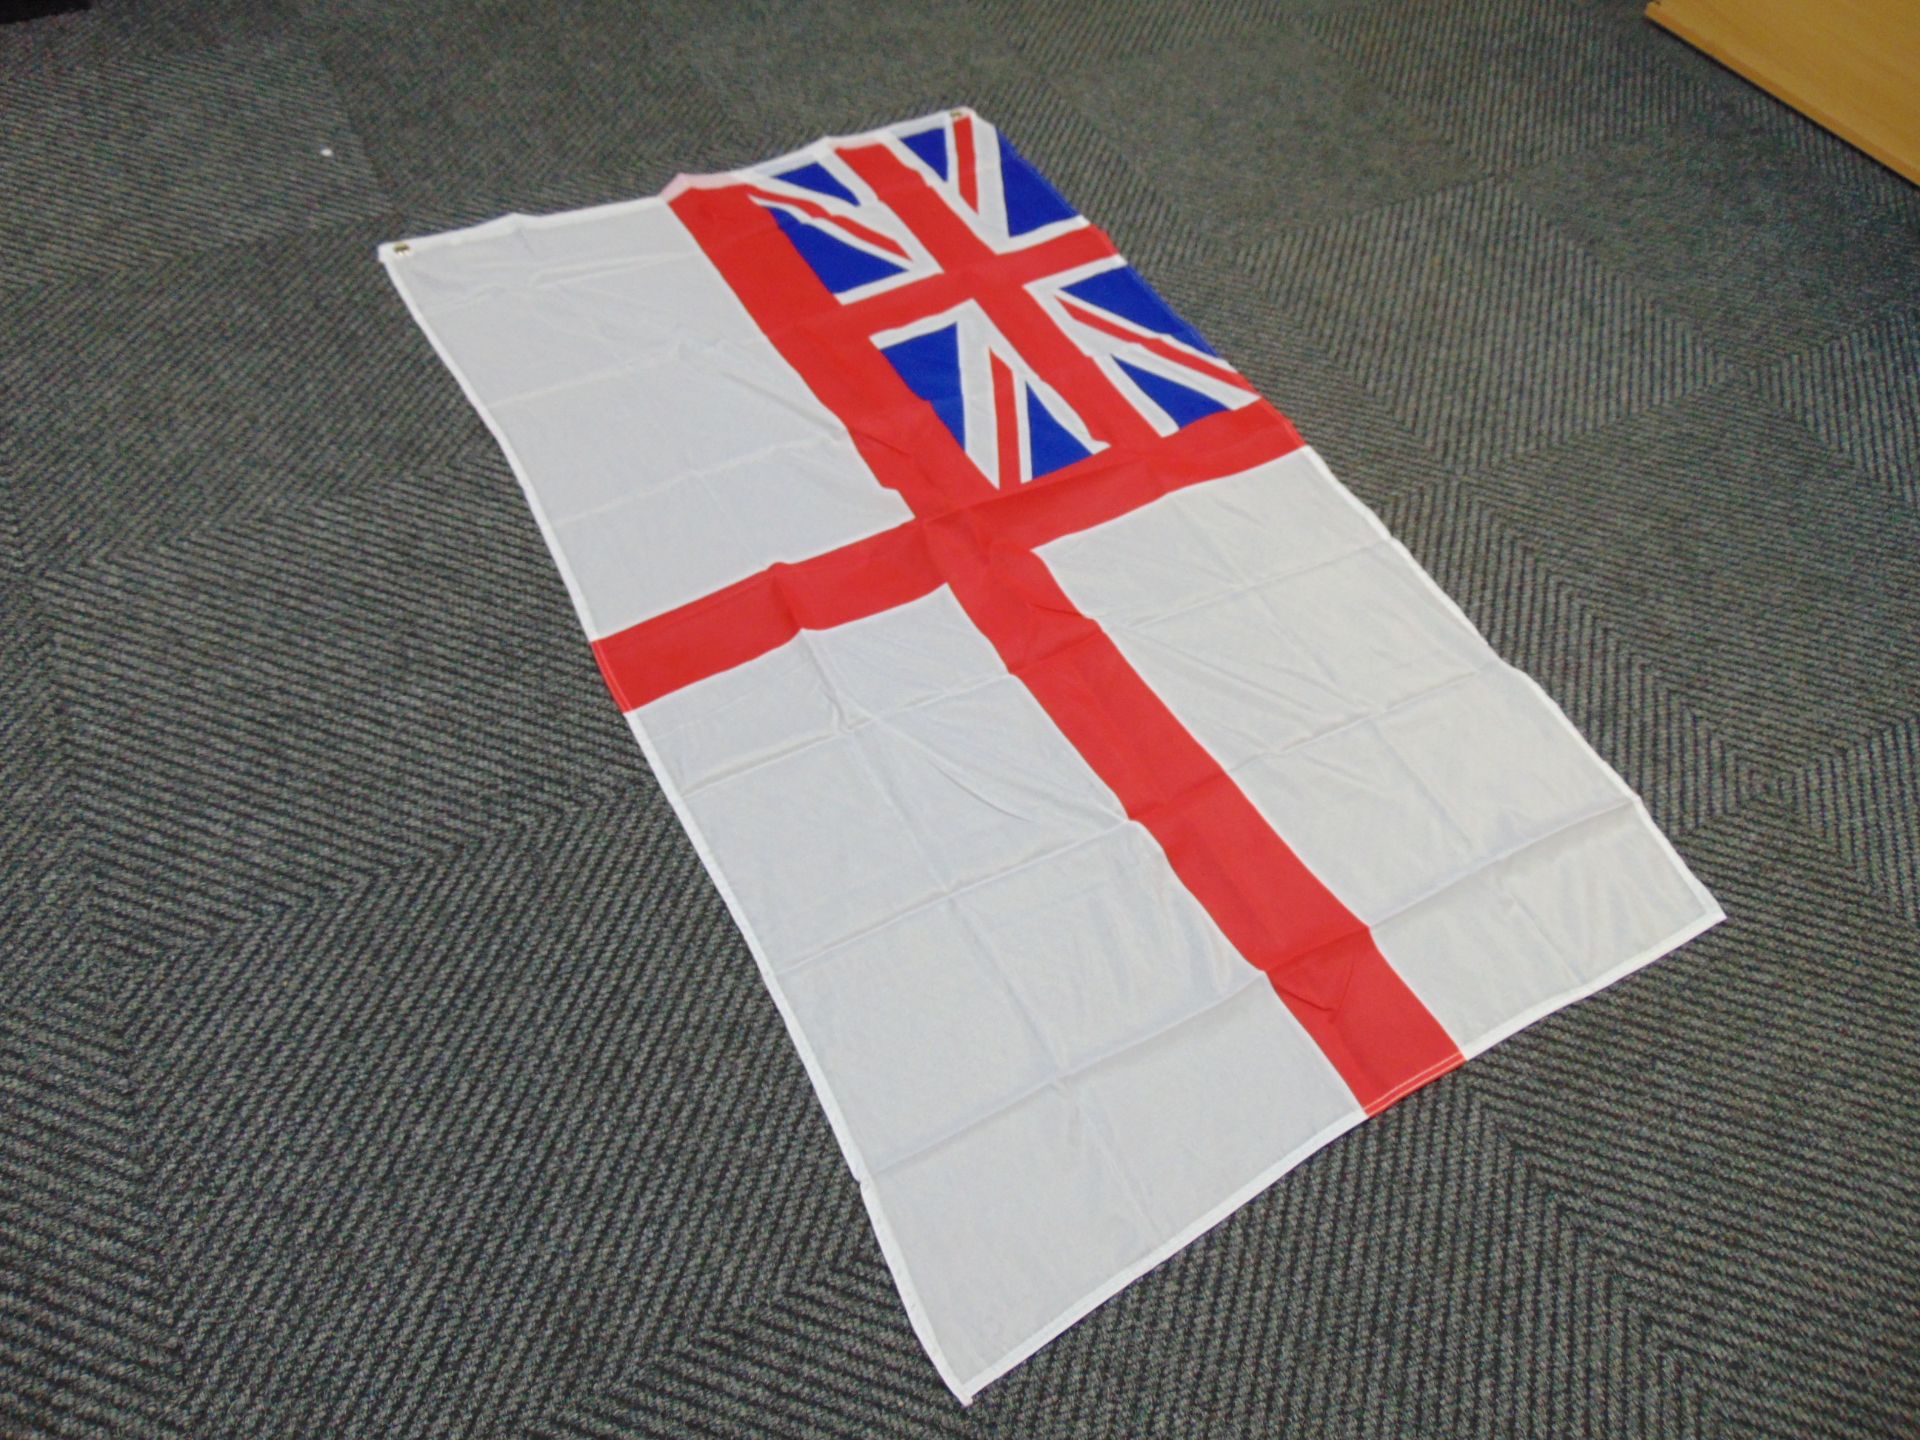 White Ensign Flag - 5ft x 3ft with Metal Eyelets. - Image 2 of 4